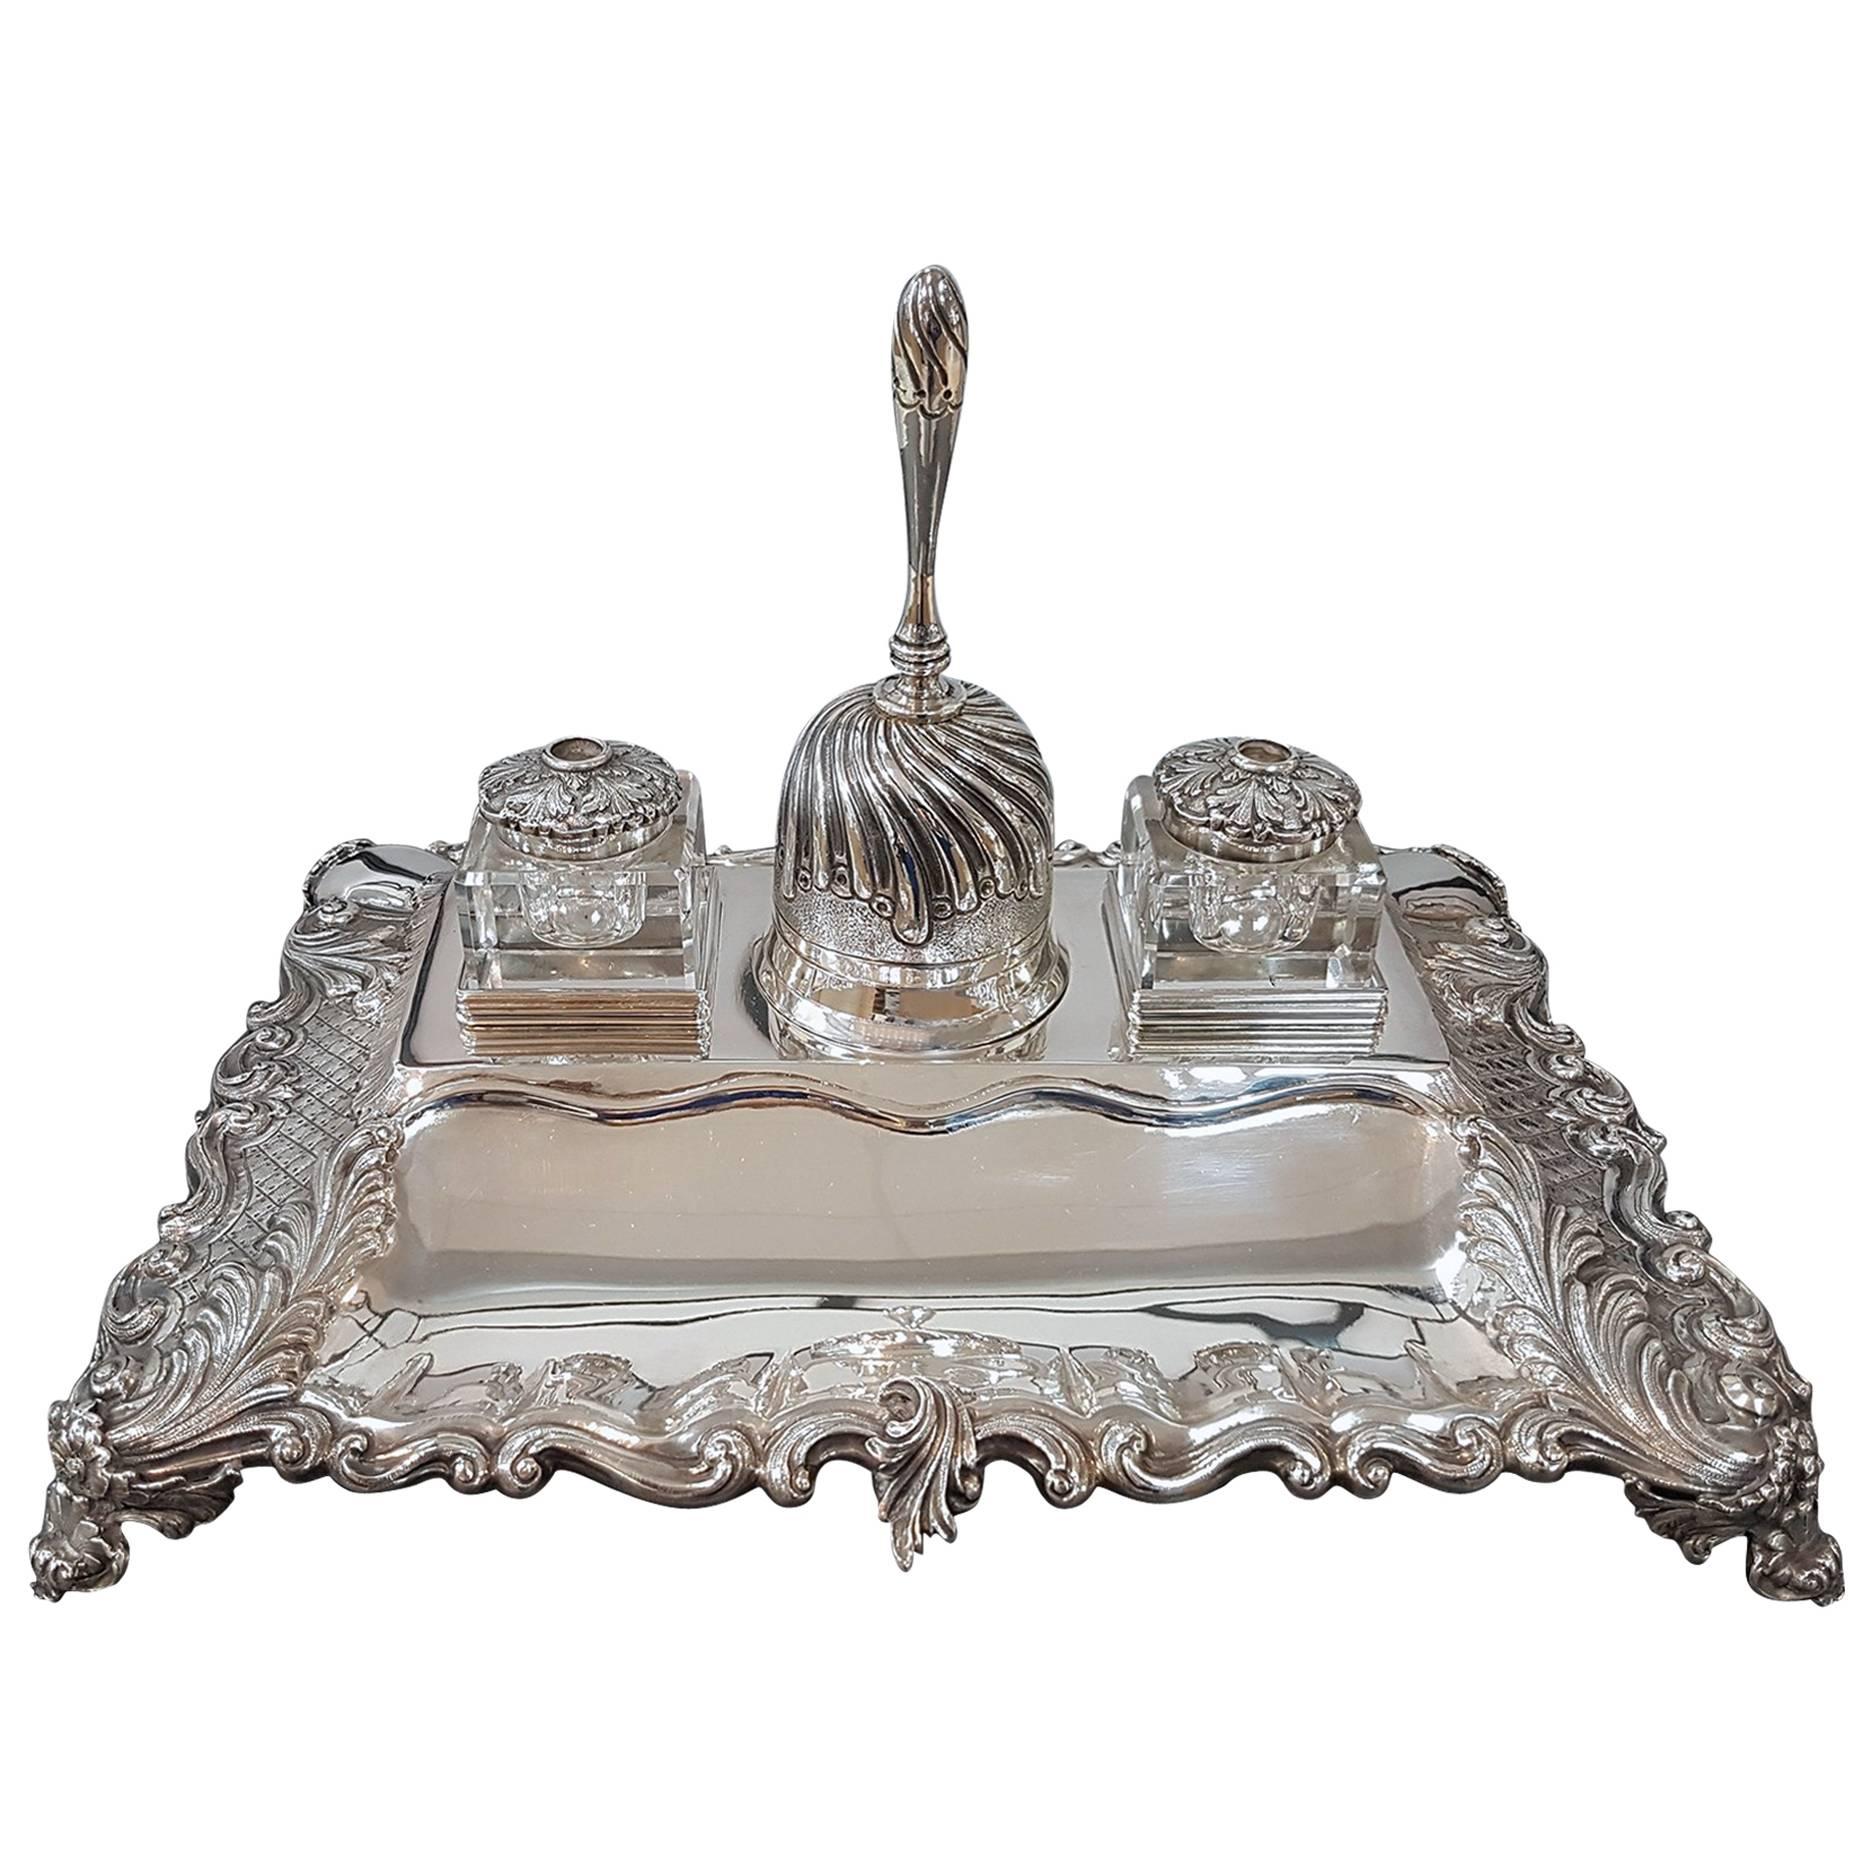 20th Century Italian Sterling Silver Inkstand, hHandicraft made in Italy